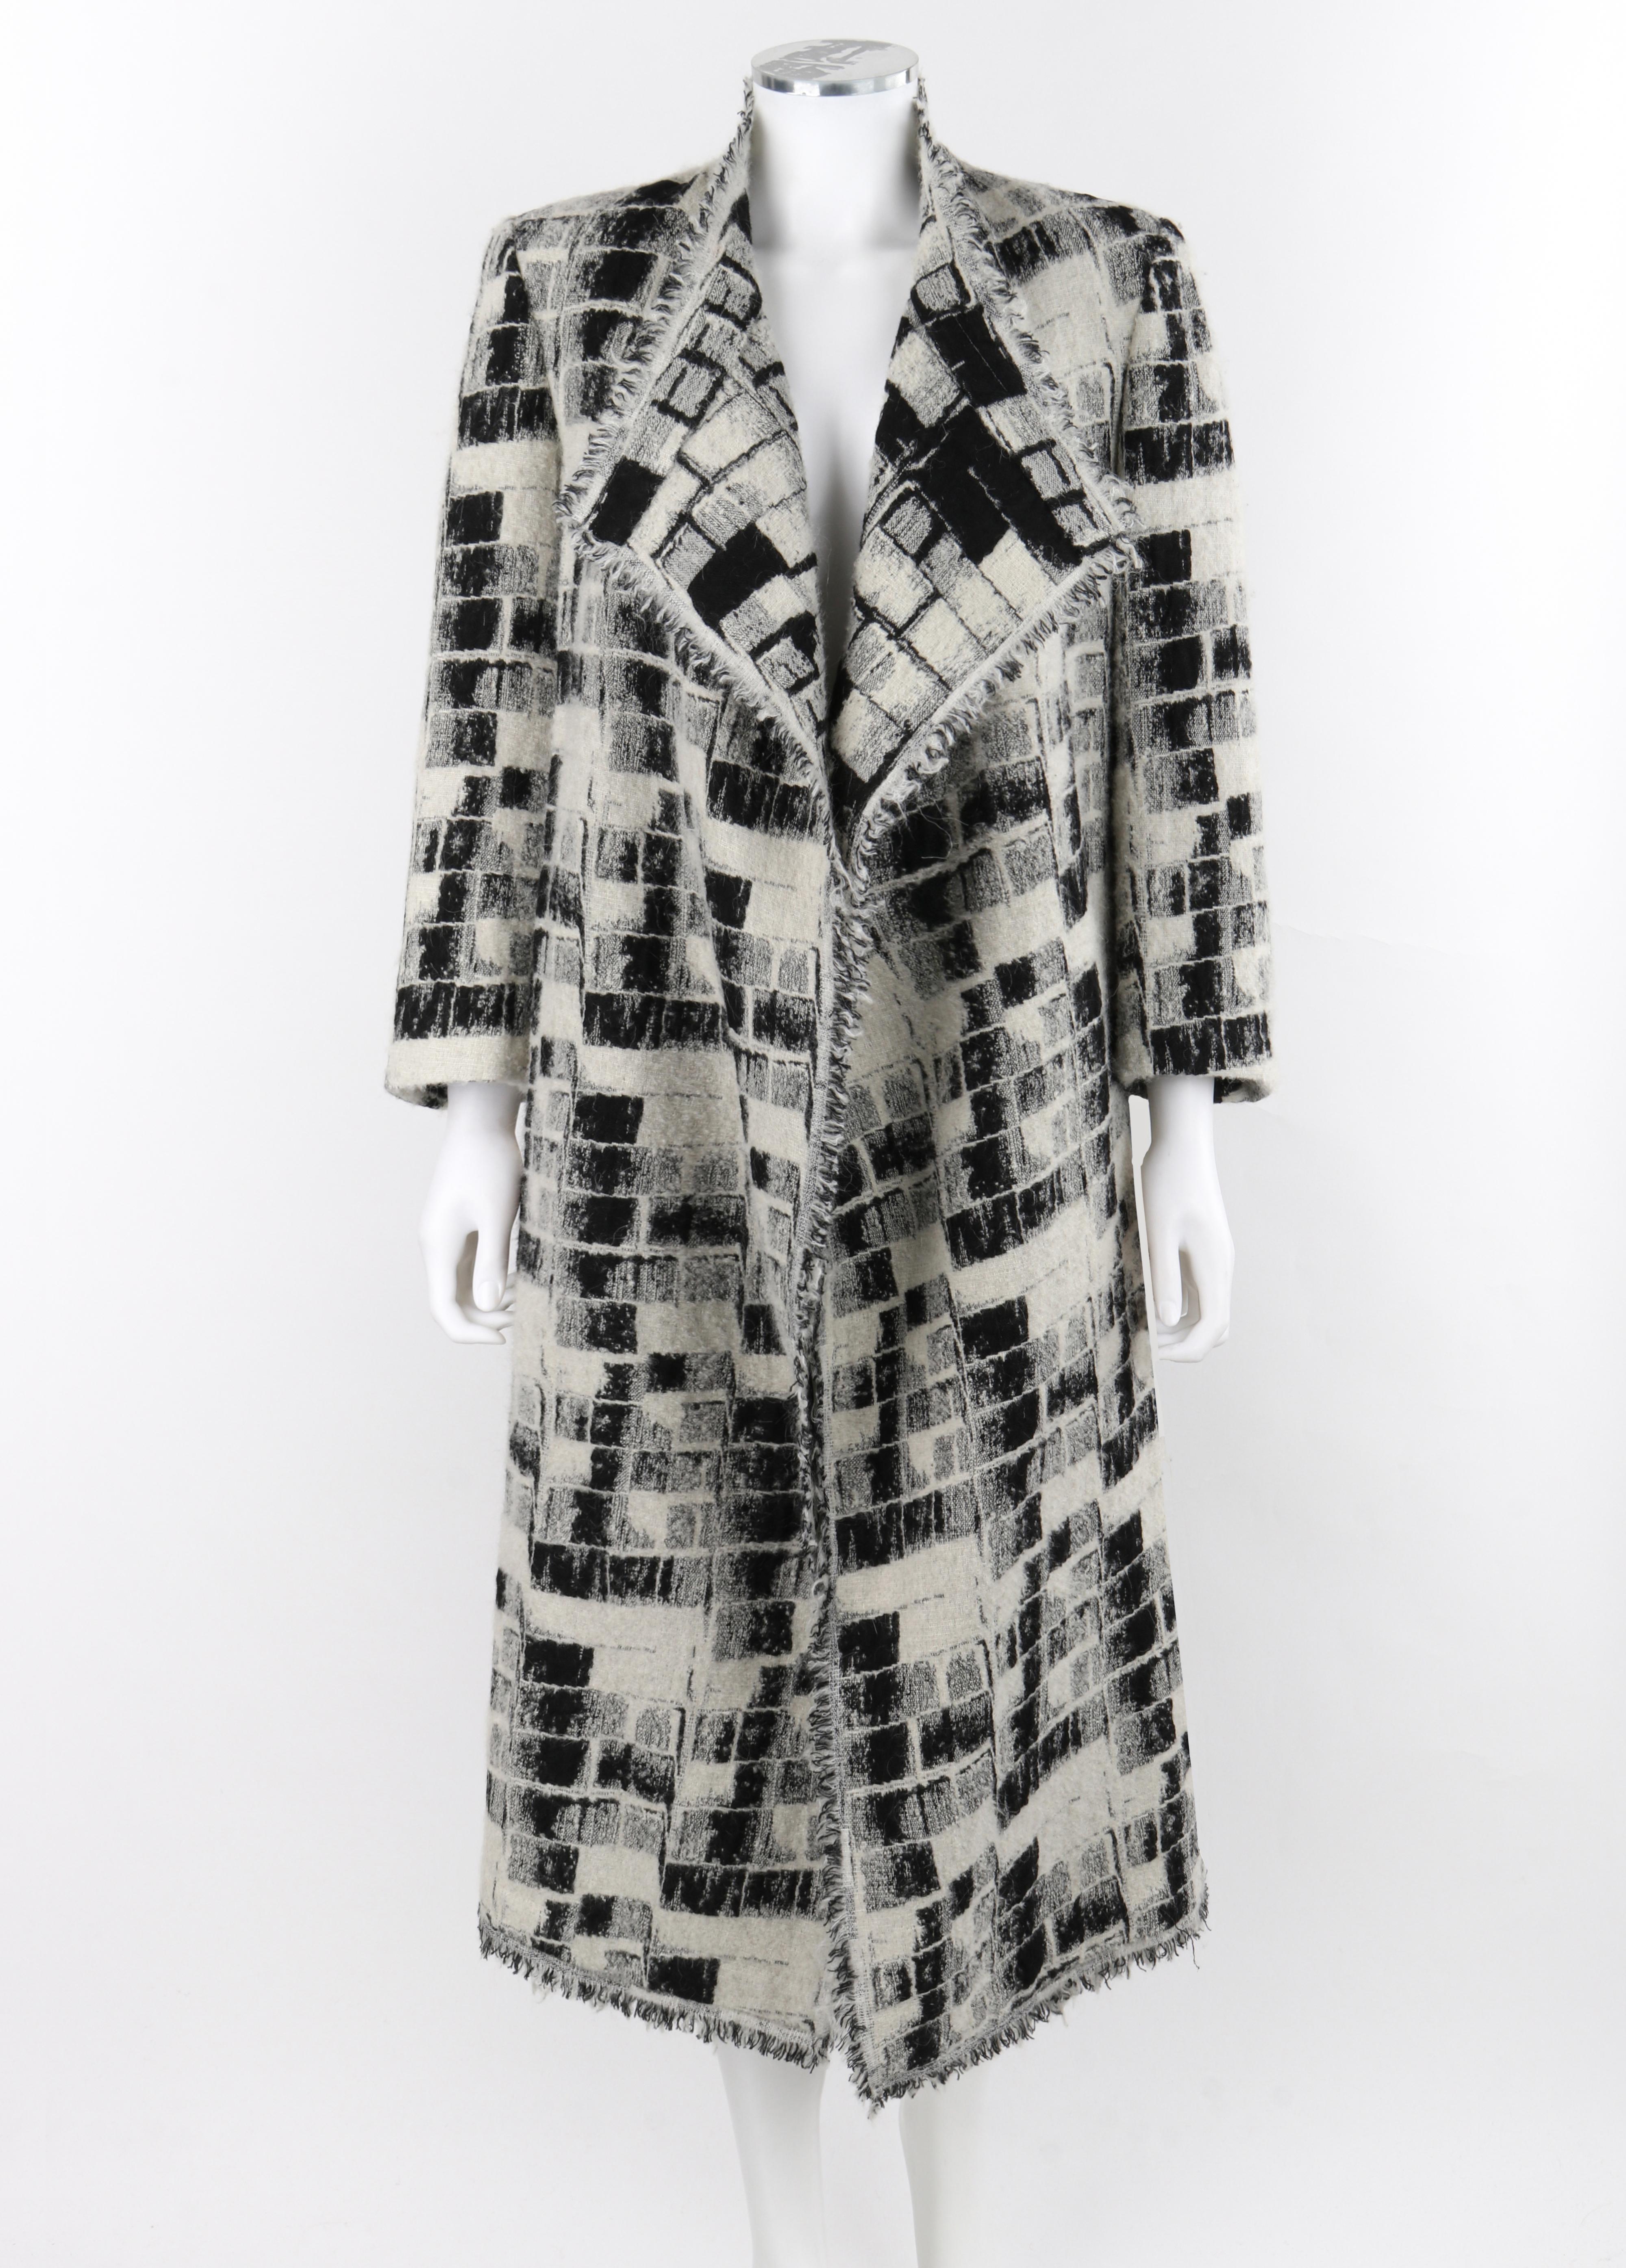 DONNA KARAN Pre-Fall 2015 Black White Checker Knit Open Cardigan Jacket

Brand / Manufacturer: Donna Karan 
Collection: Pre-Fall 2015
Designer: Donna Karan
Style: Cardigan Jacket
Color(s): Shades of white, black, grey
Lined: No
Marked Fabric: 